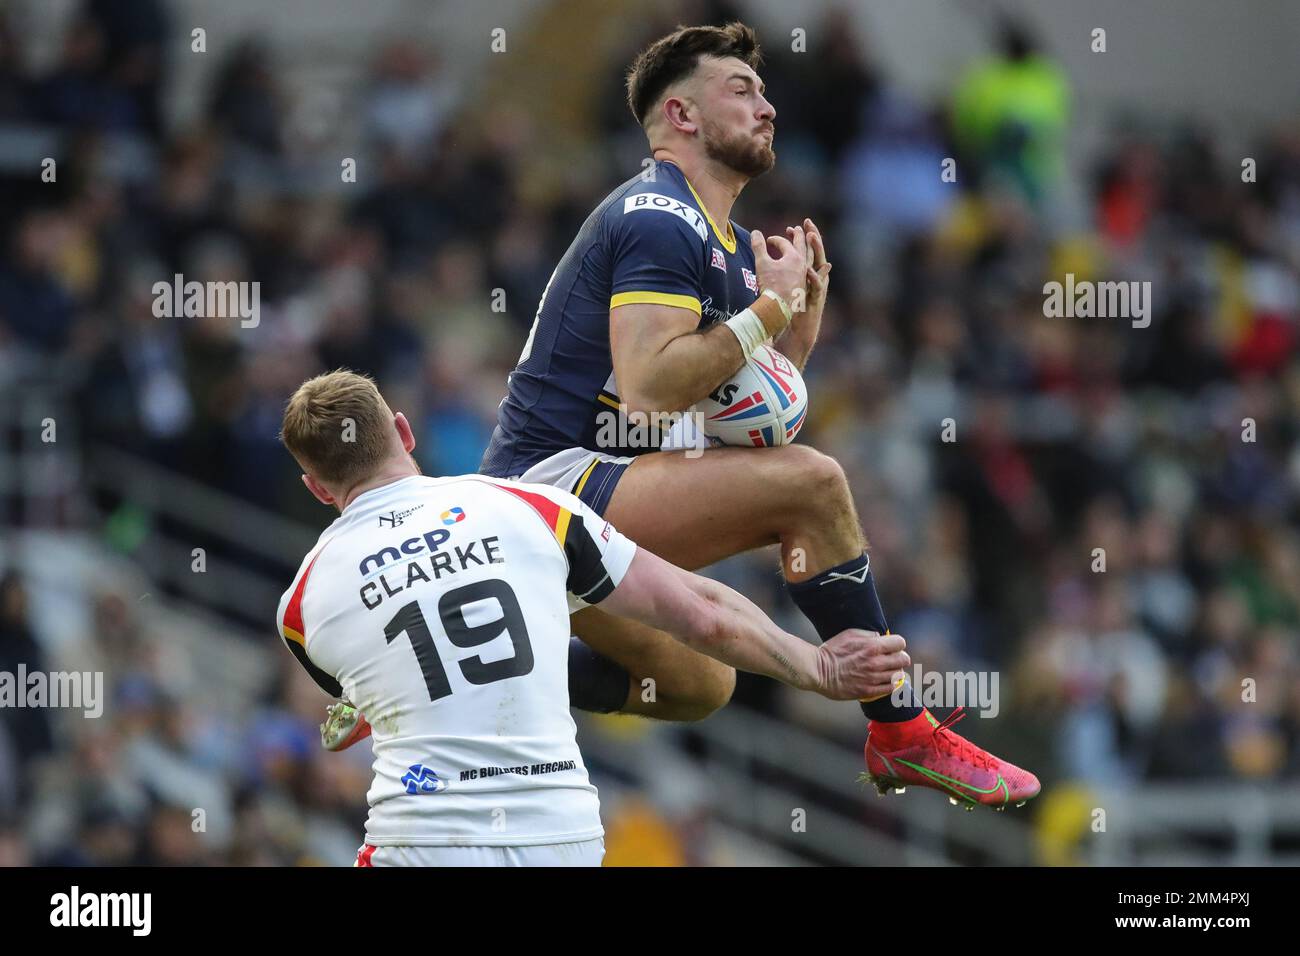 Liam Tindall #23 of Leeds Rhinos catches the ball during the Rugby League Pre Season match Leeds Rhinos vs Bradford Bulls at Headingley Stadium, Leeds, United Kingdom, 29th January 2023  (Photo by James Heaton/News Images) Stock Photo